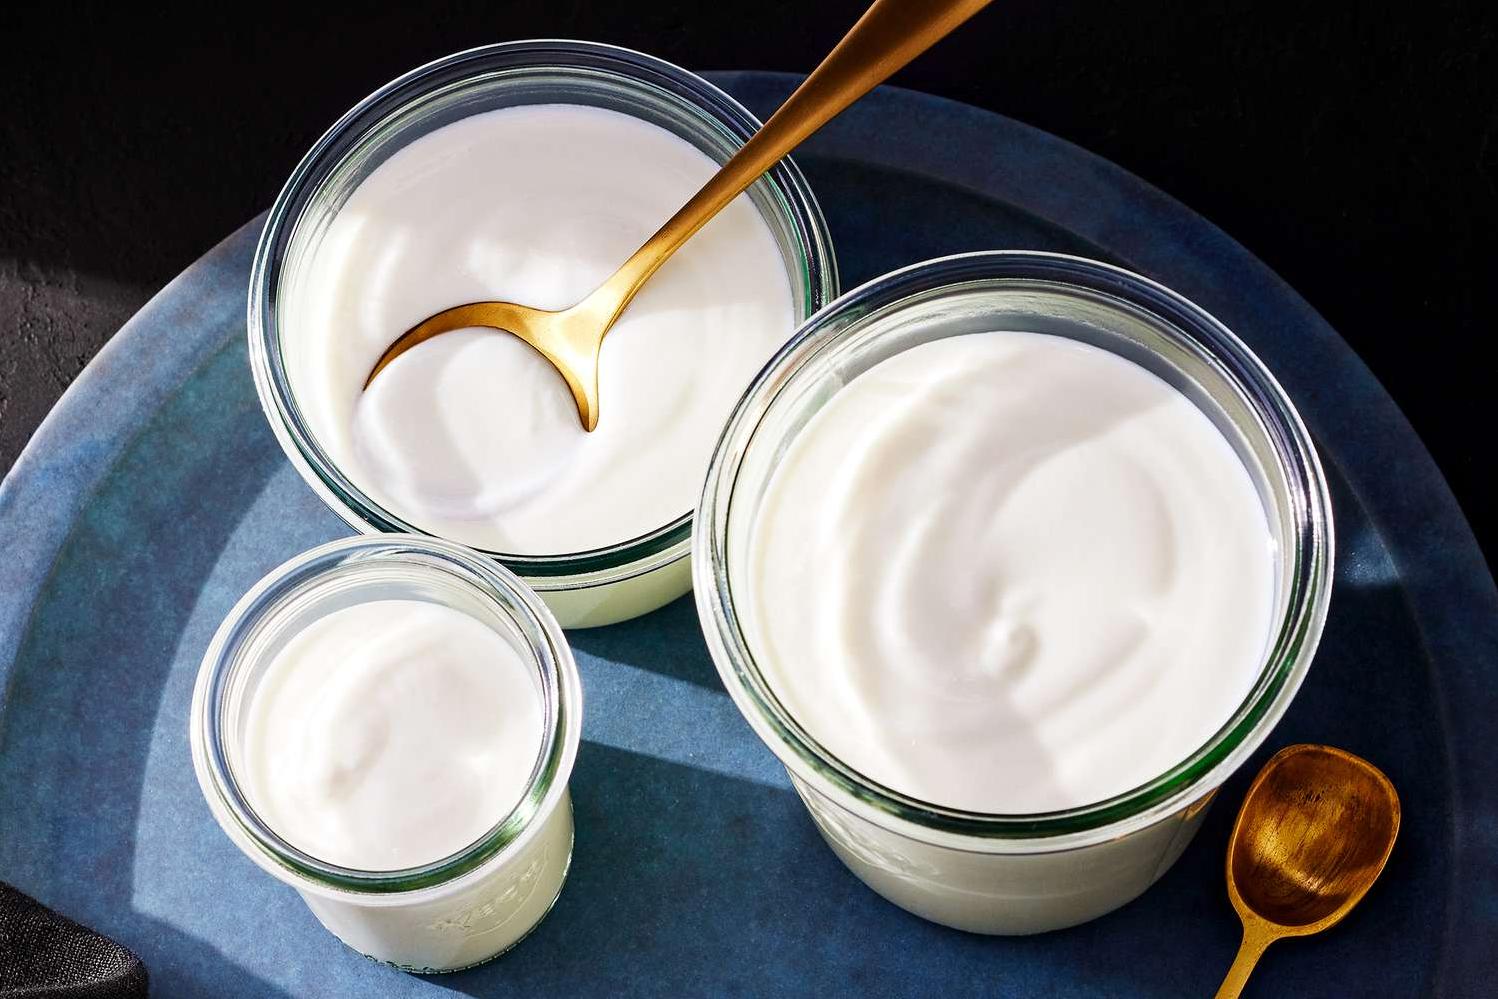  Creamy and tangy, this Vietnamese Yogurt is the perfect breakfast or dessert!